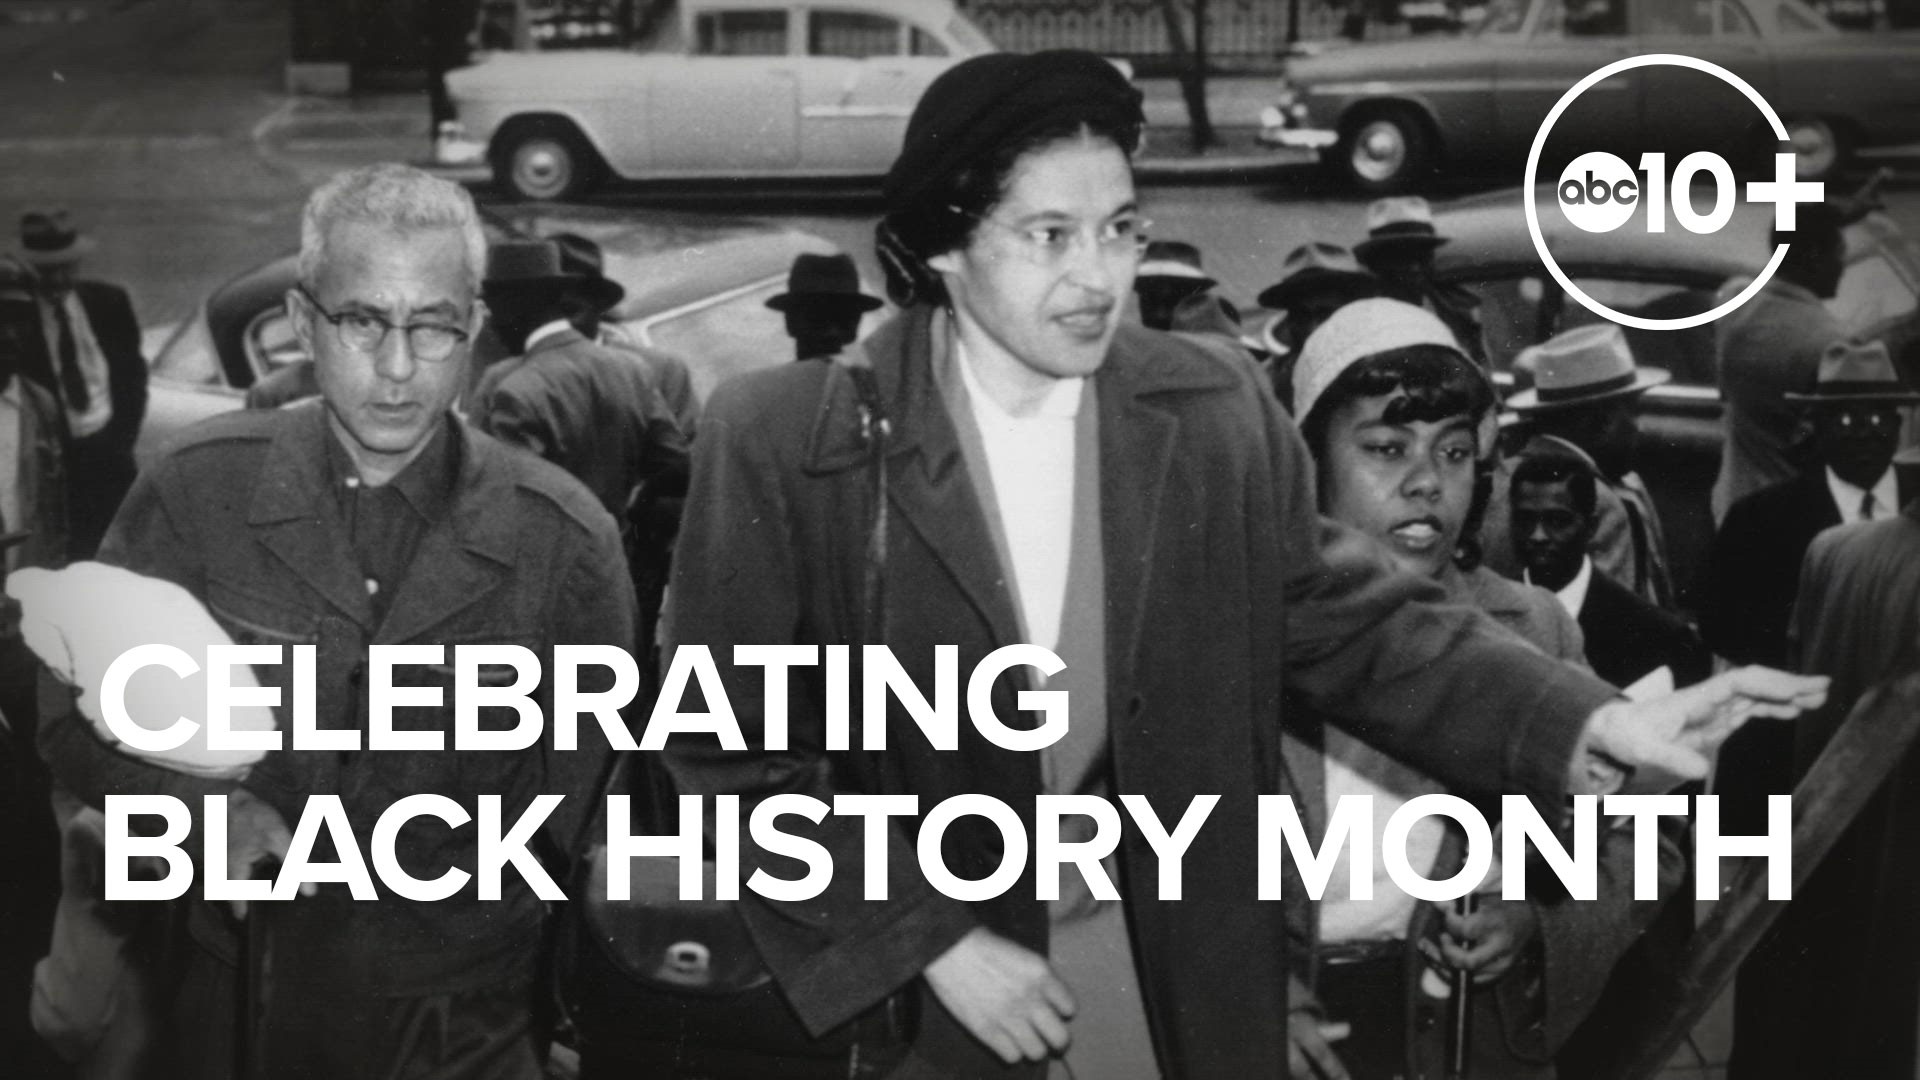 In this ABC10 collection, we highlight community voices from the Black community this Black History Month.